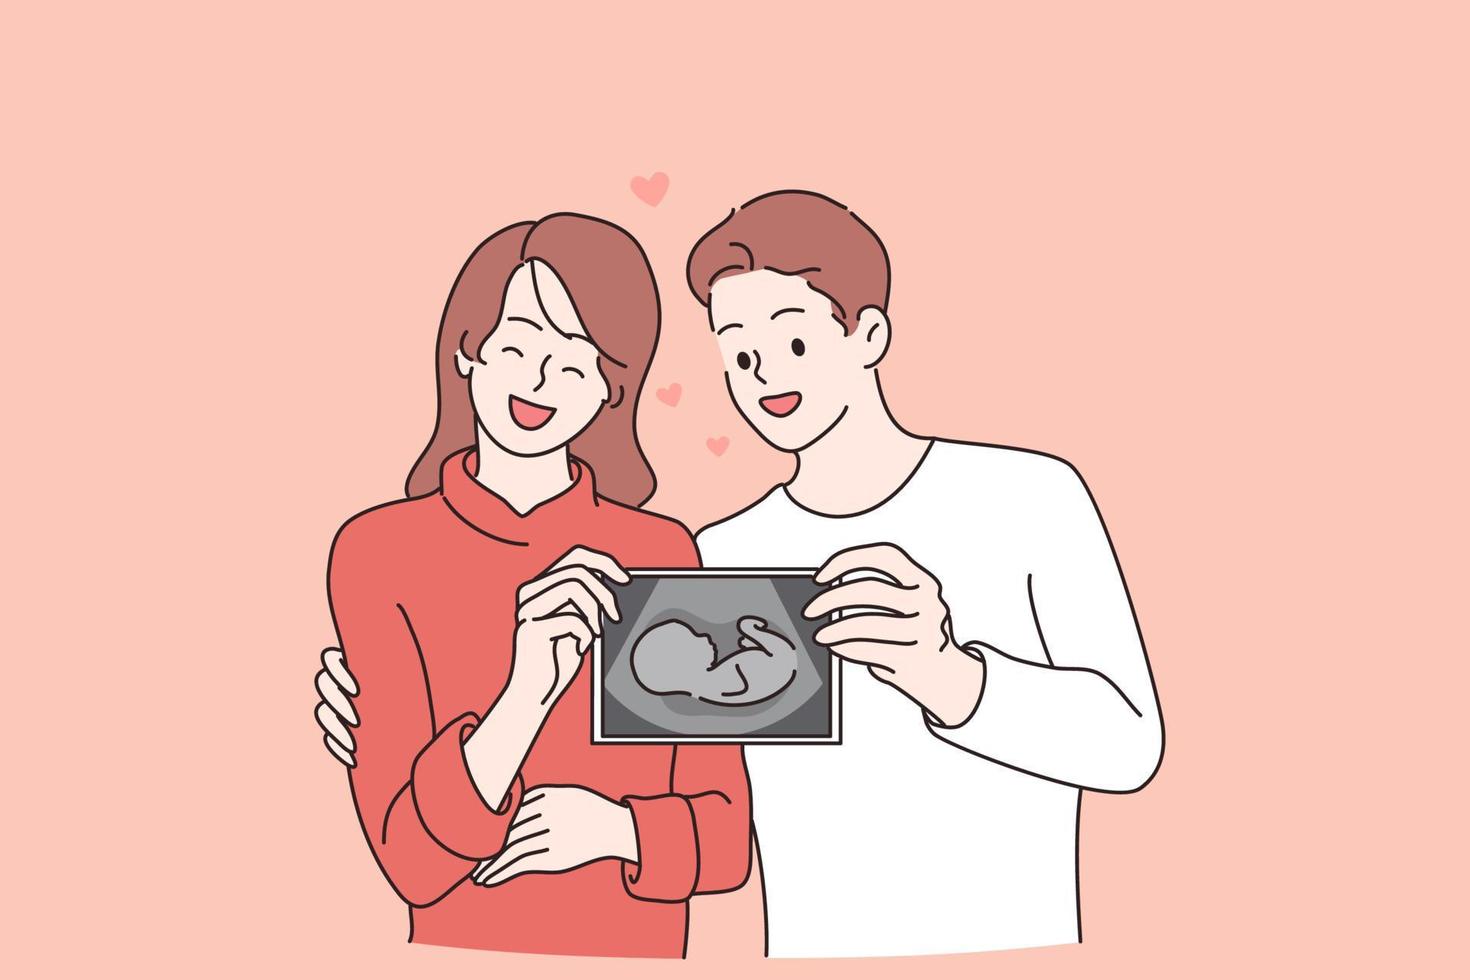 Awaiting for baby and couple happiness concept. Young smiling couple cartoon characters standing holding ultrasound test in hands waiting for baby feeling excited happy vector illustration